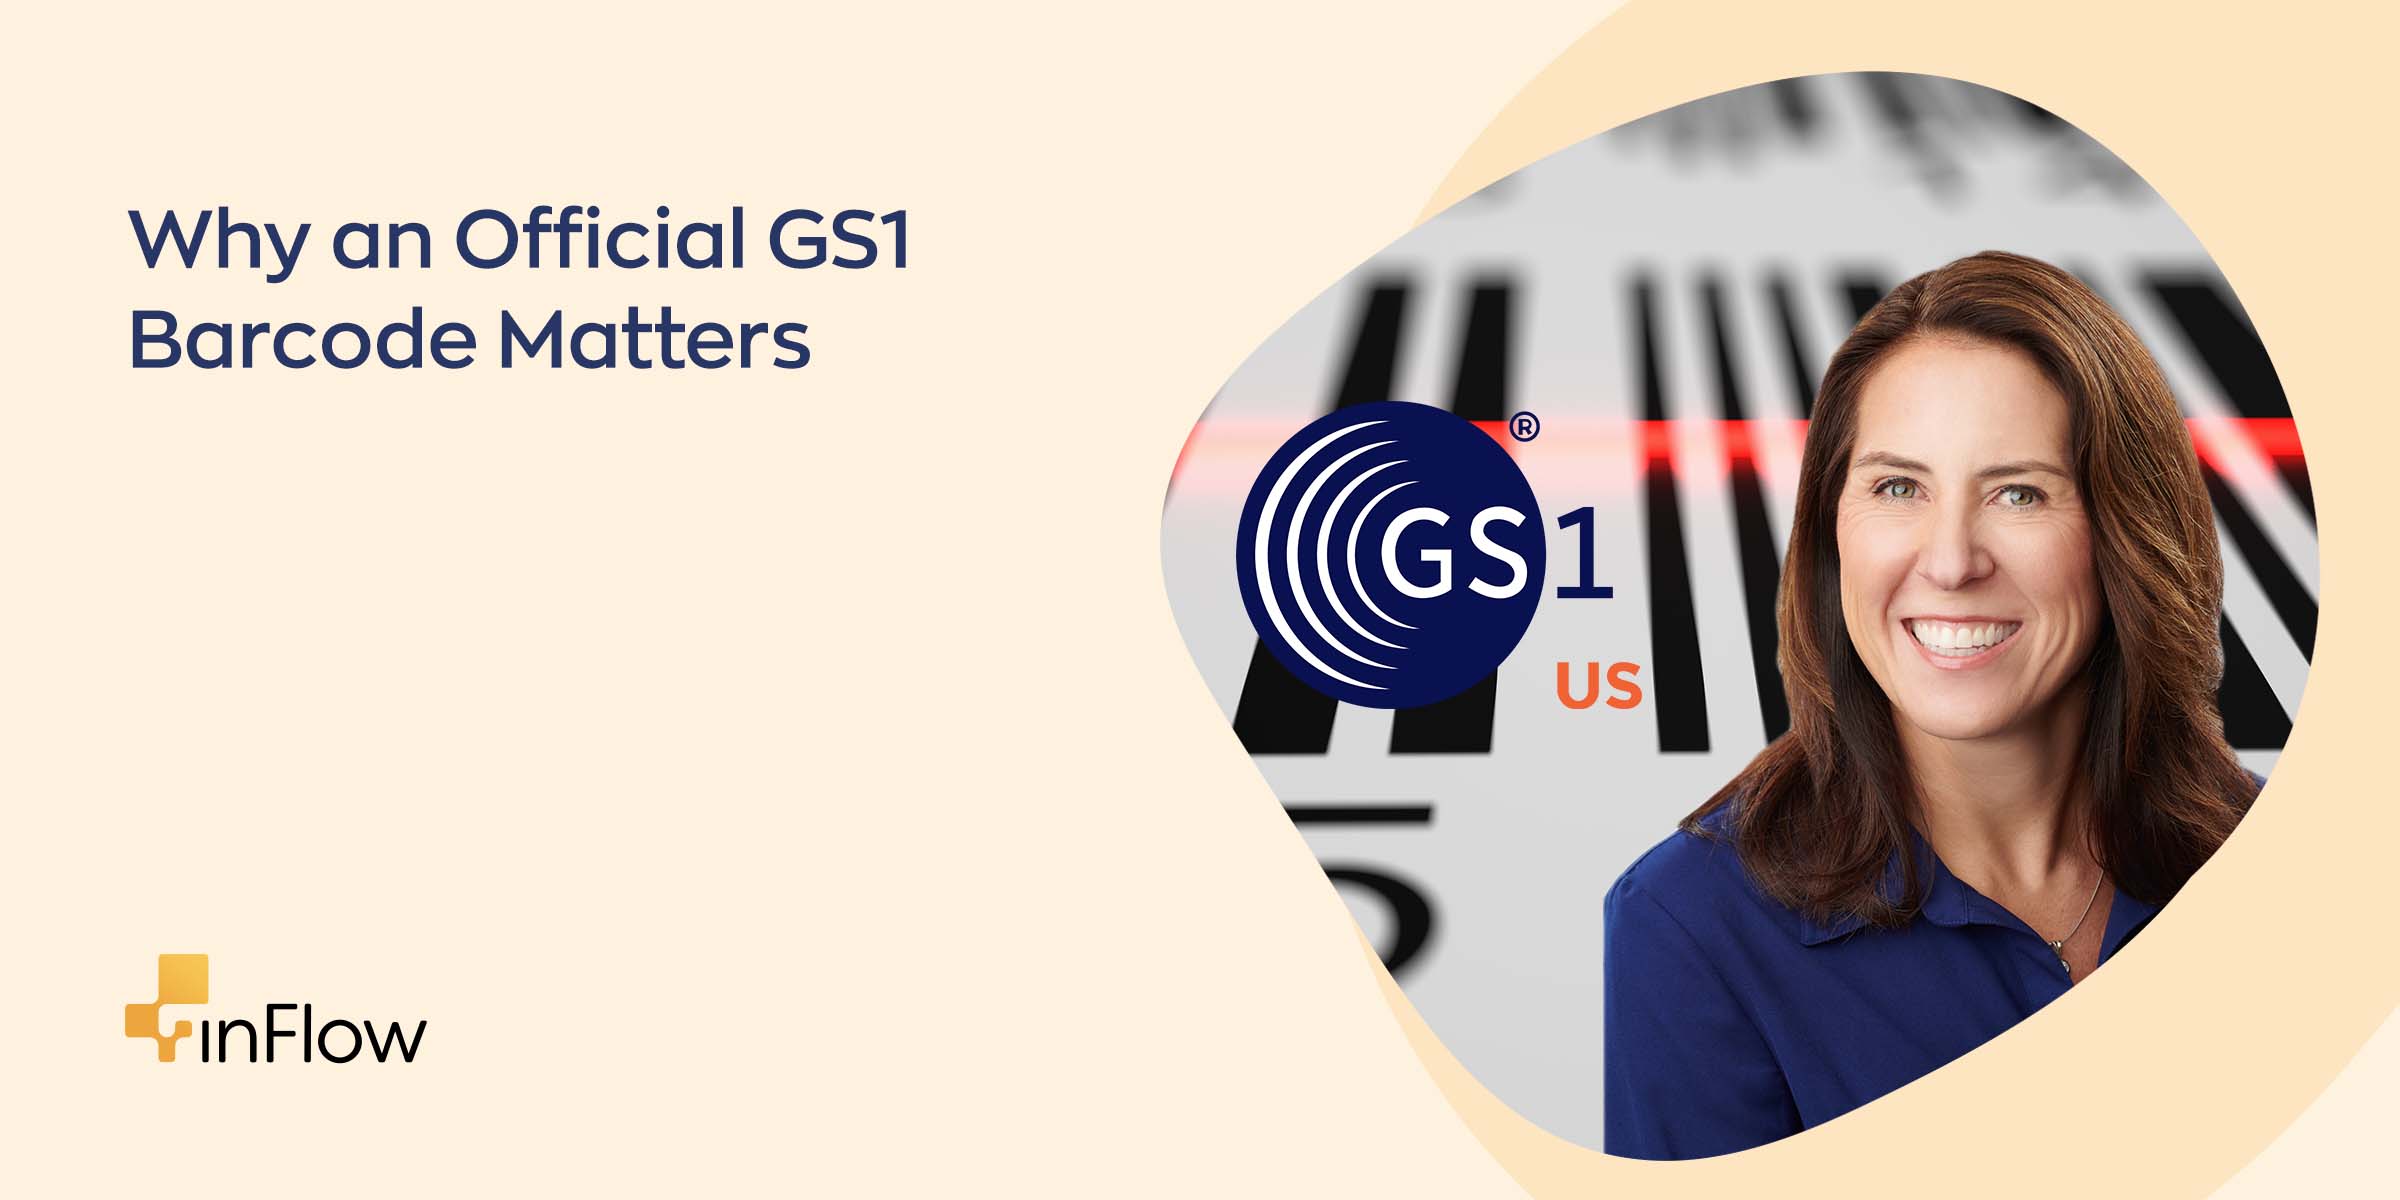 Why an Official GS1 Barcode Matters